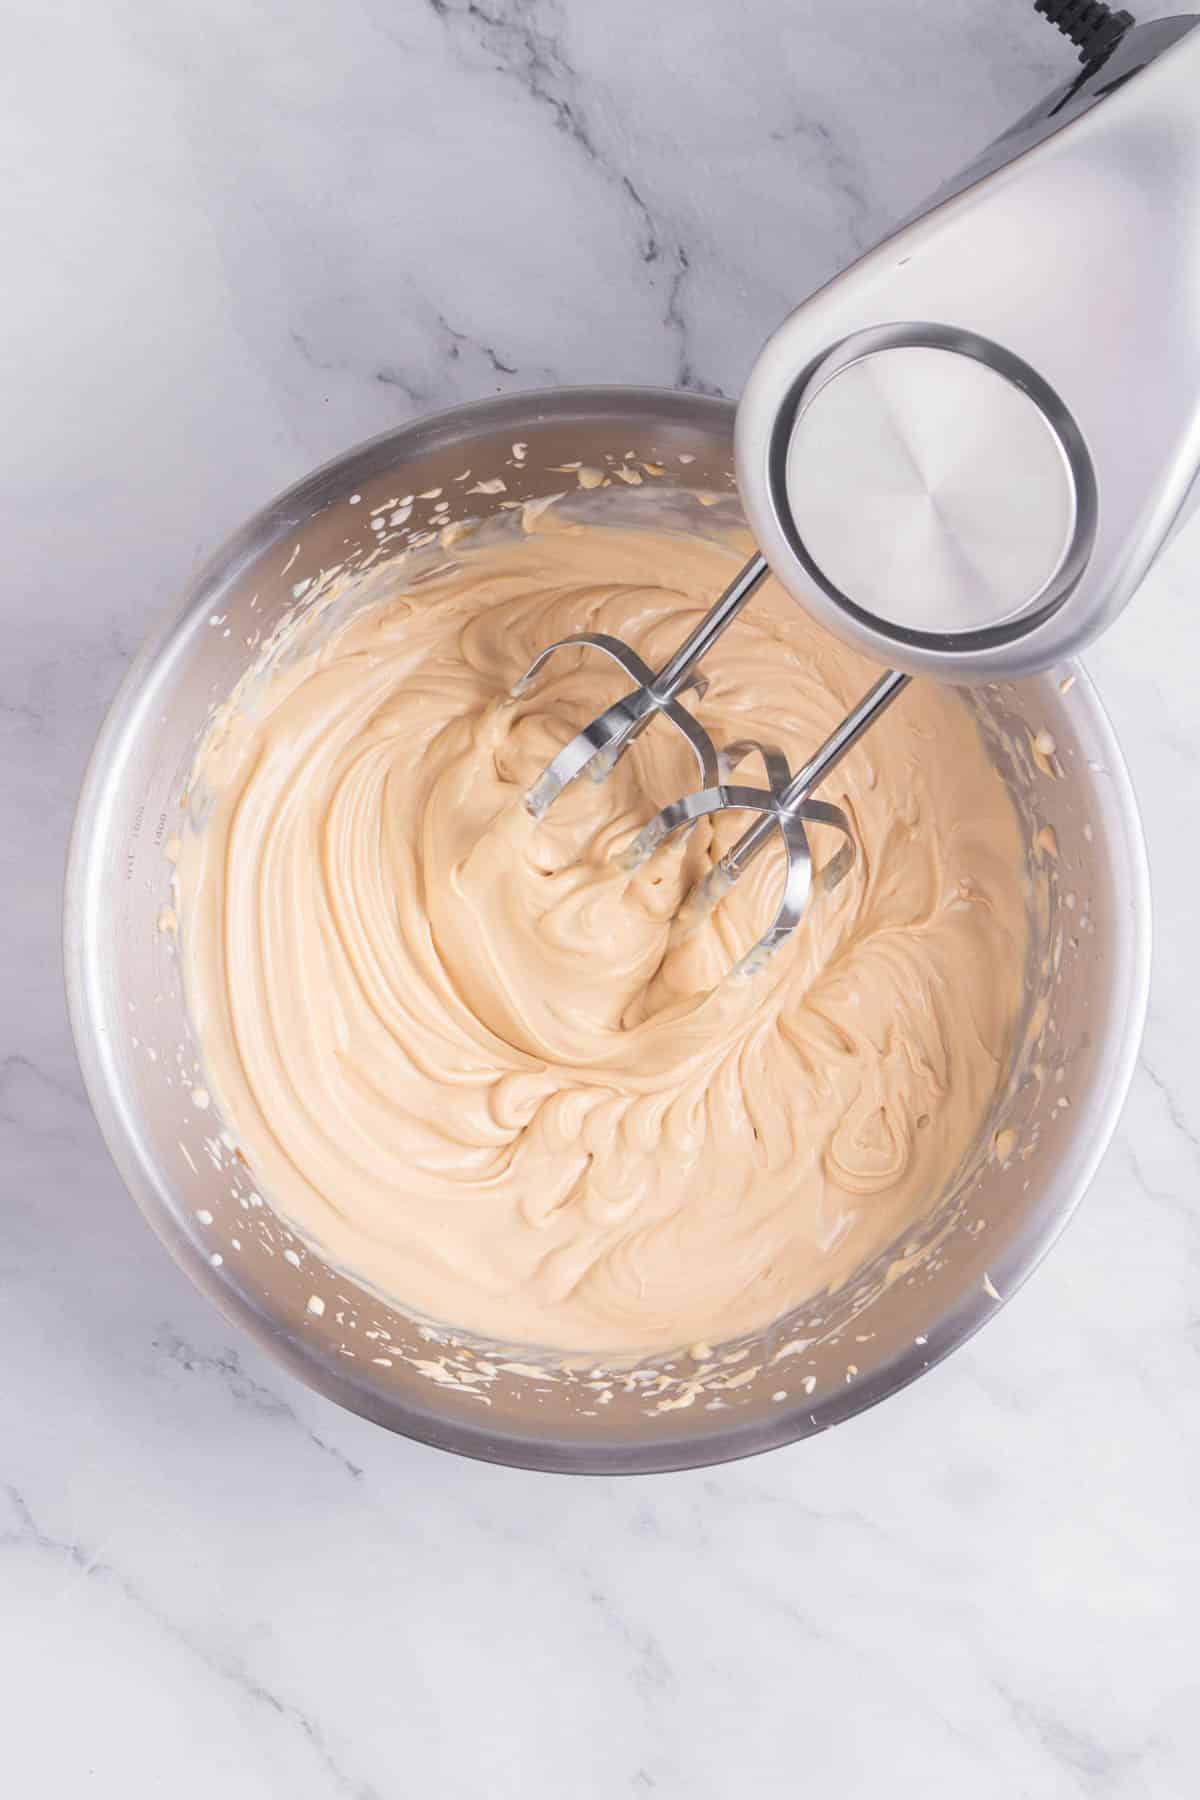 Place the cheesecake mixture in a stainless steel bowl.